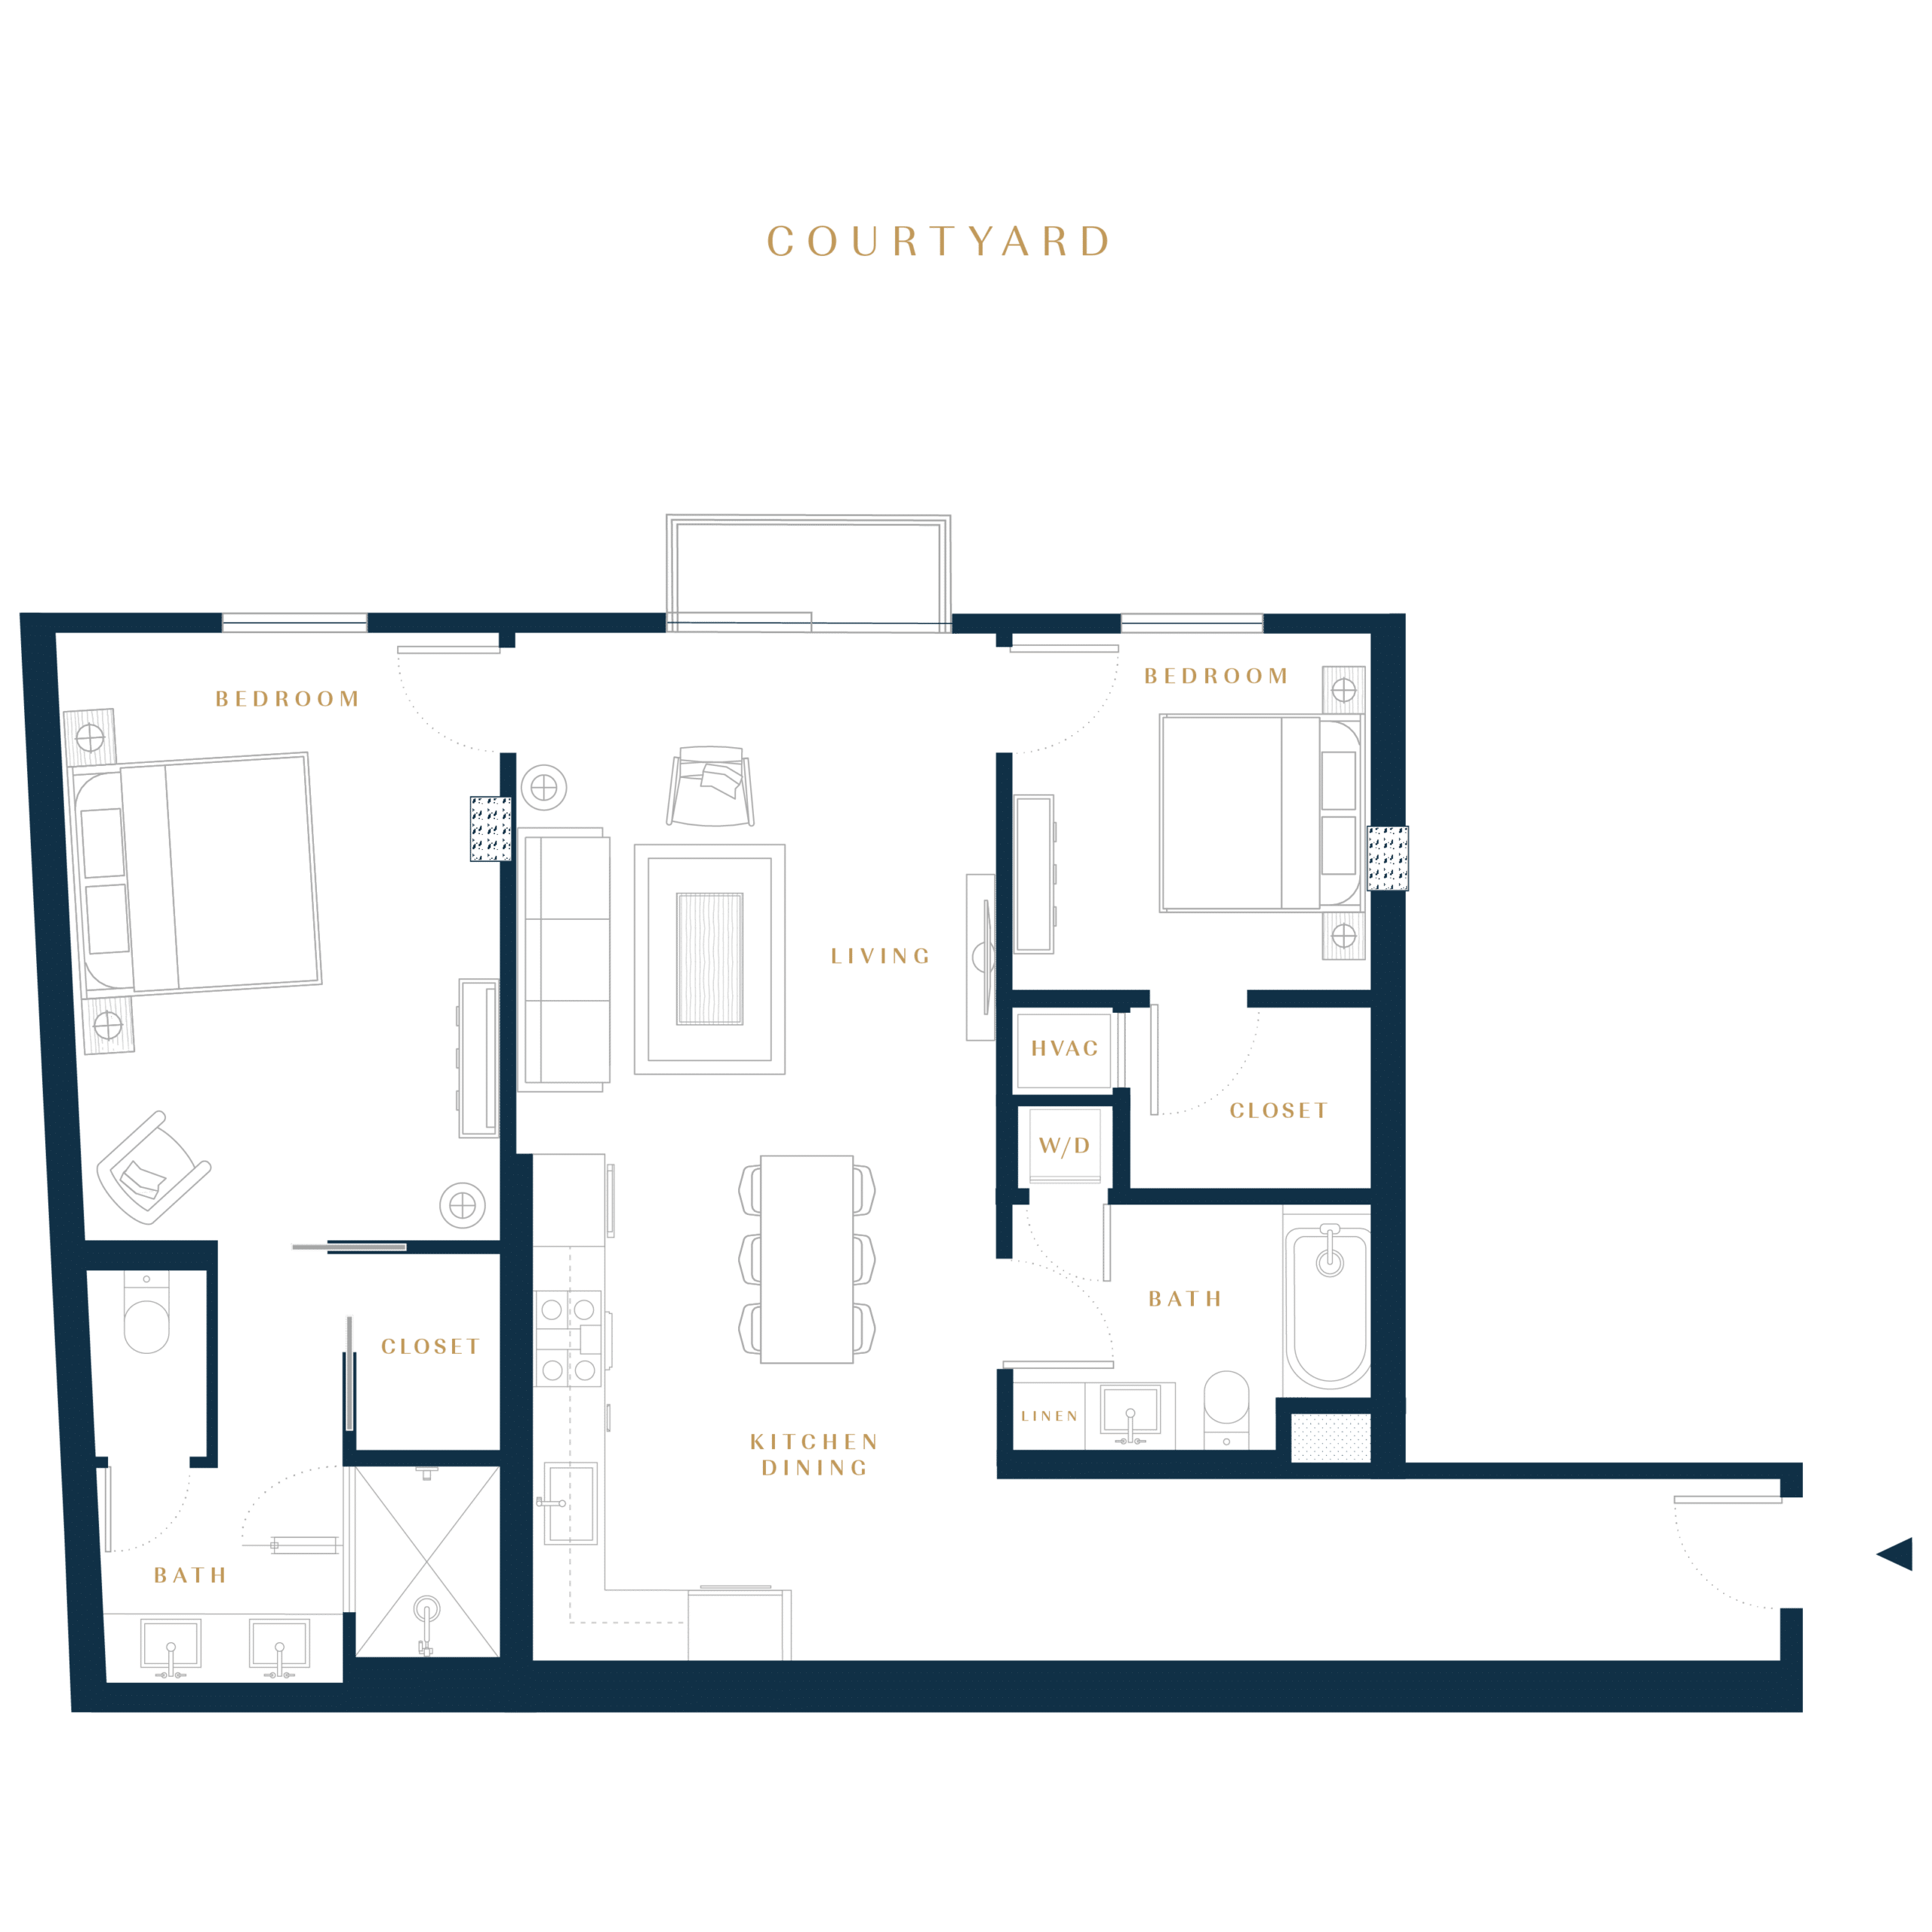 Residence 2H luxury condo floor plan in San Francisco Dogpatch